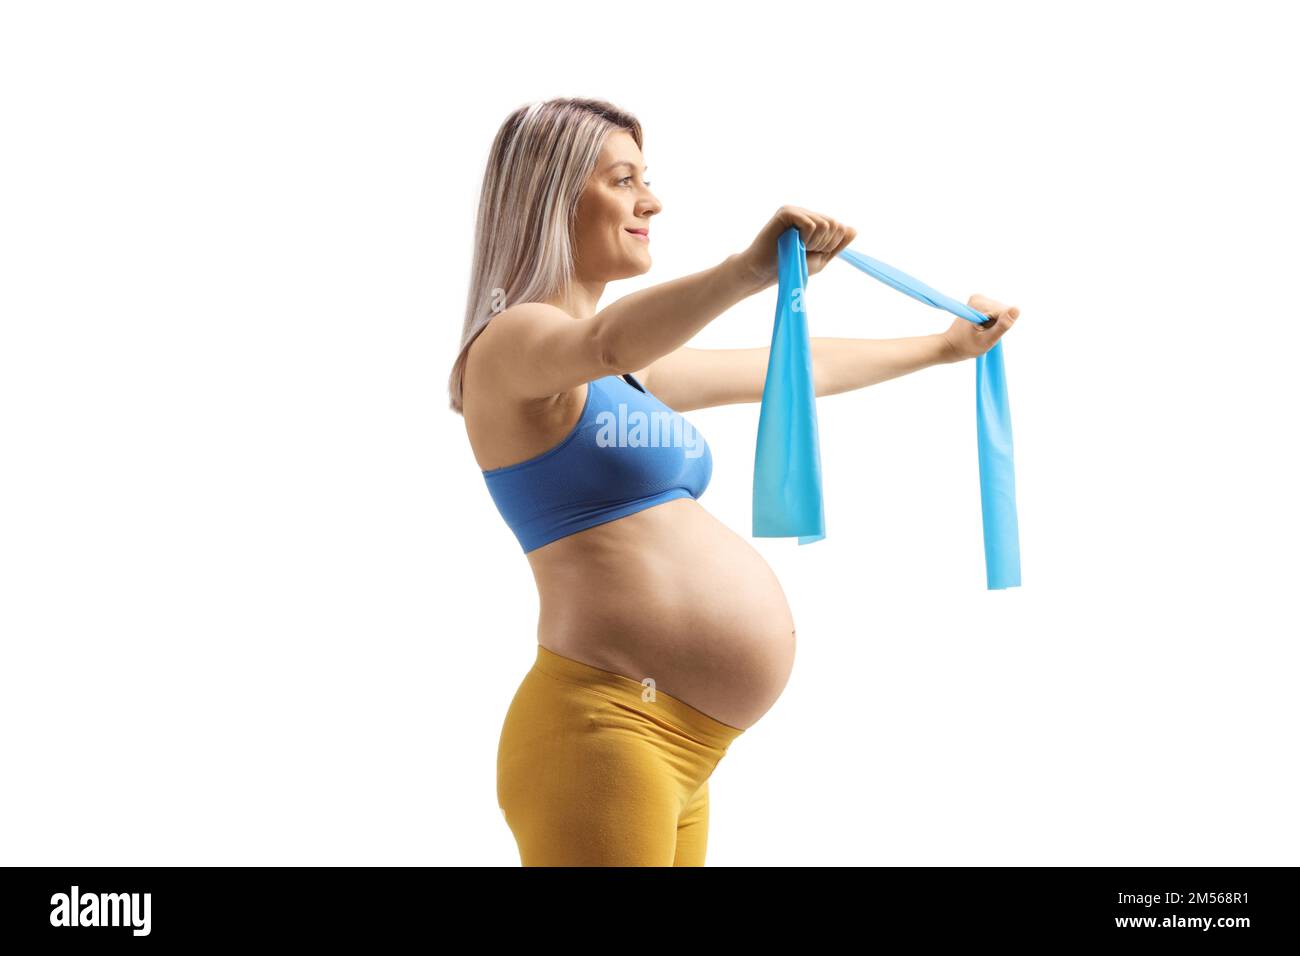 Profile shot of a pregnant woman exercising with a stretching band isolated on white background Stock Photo